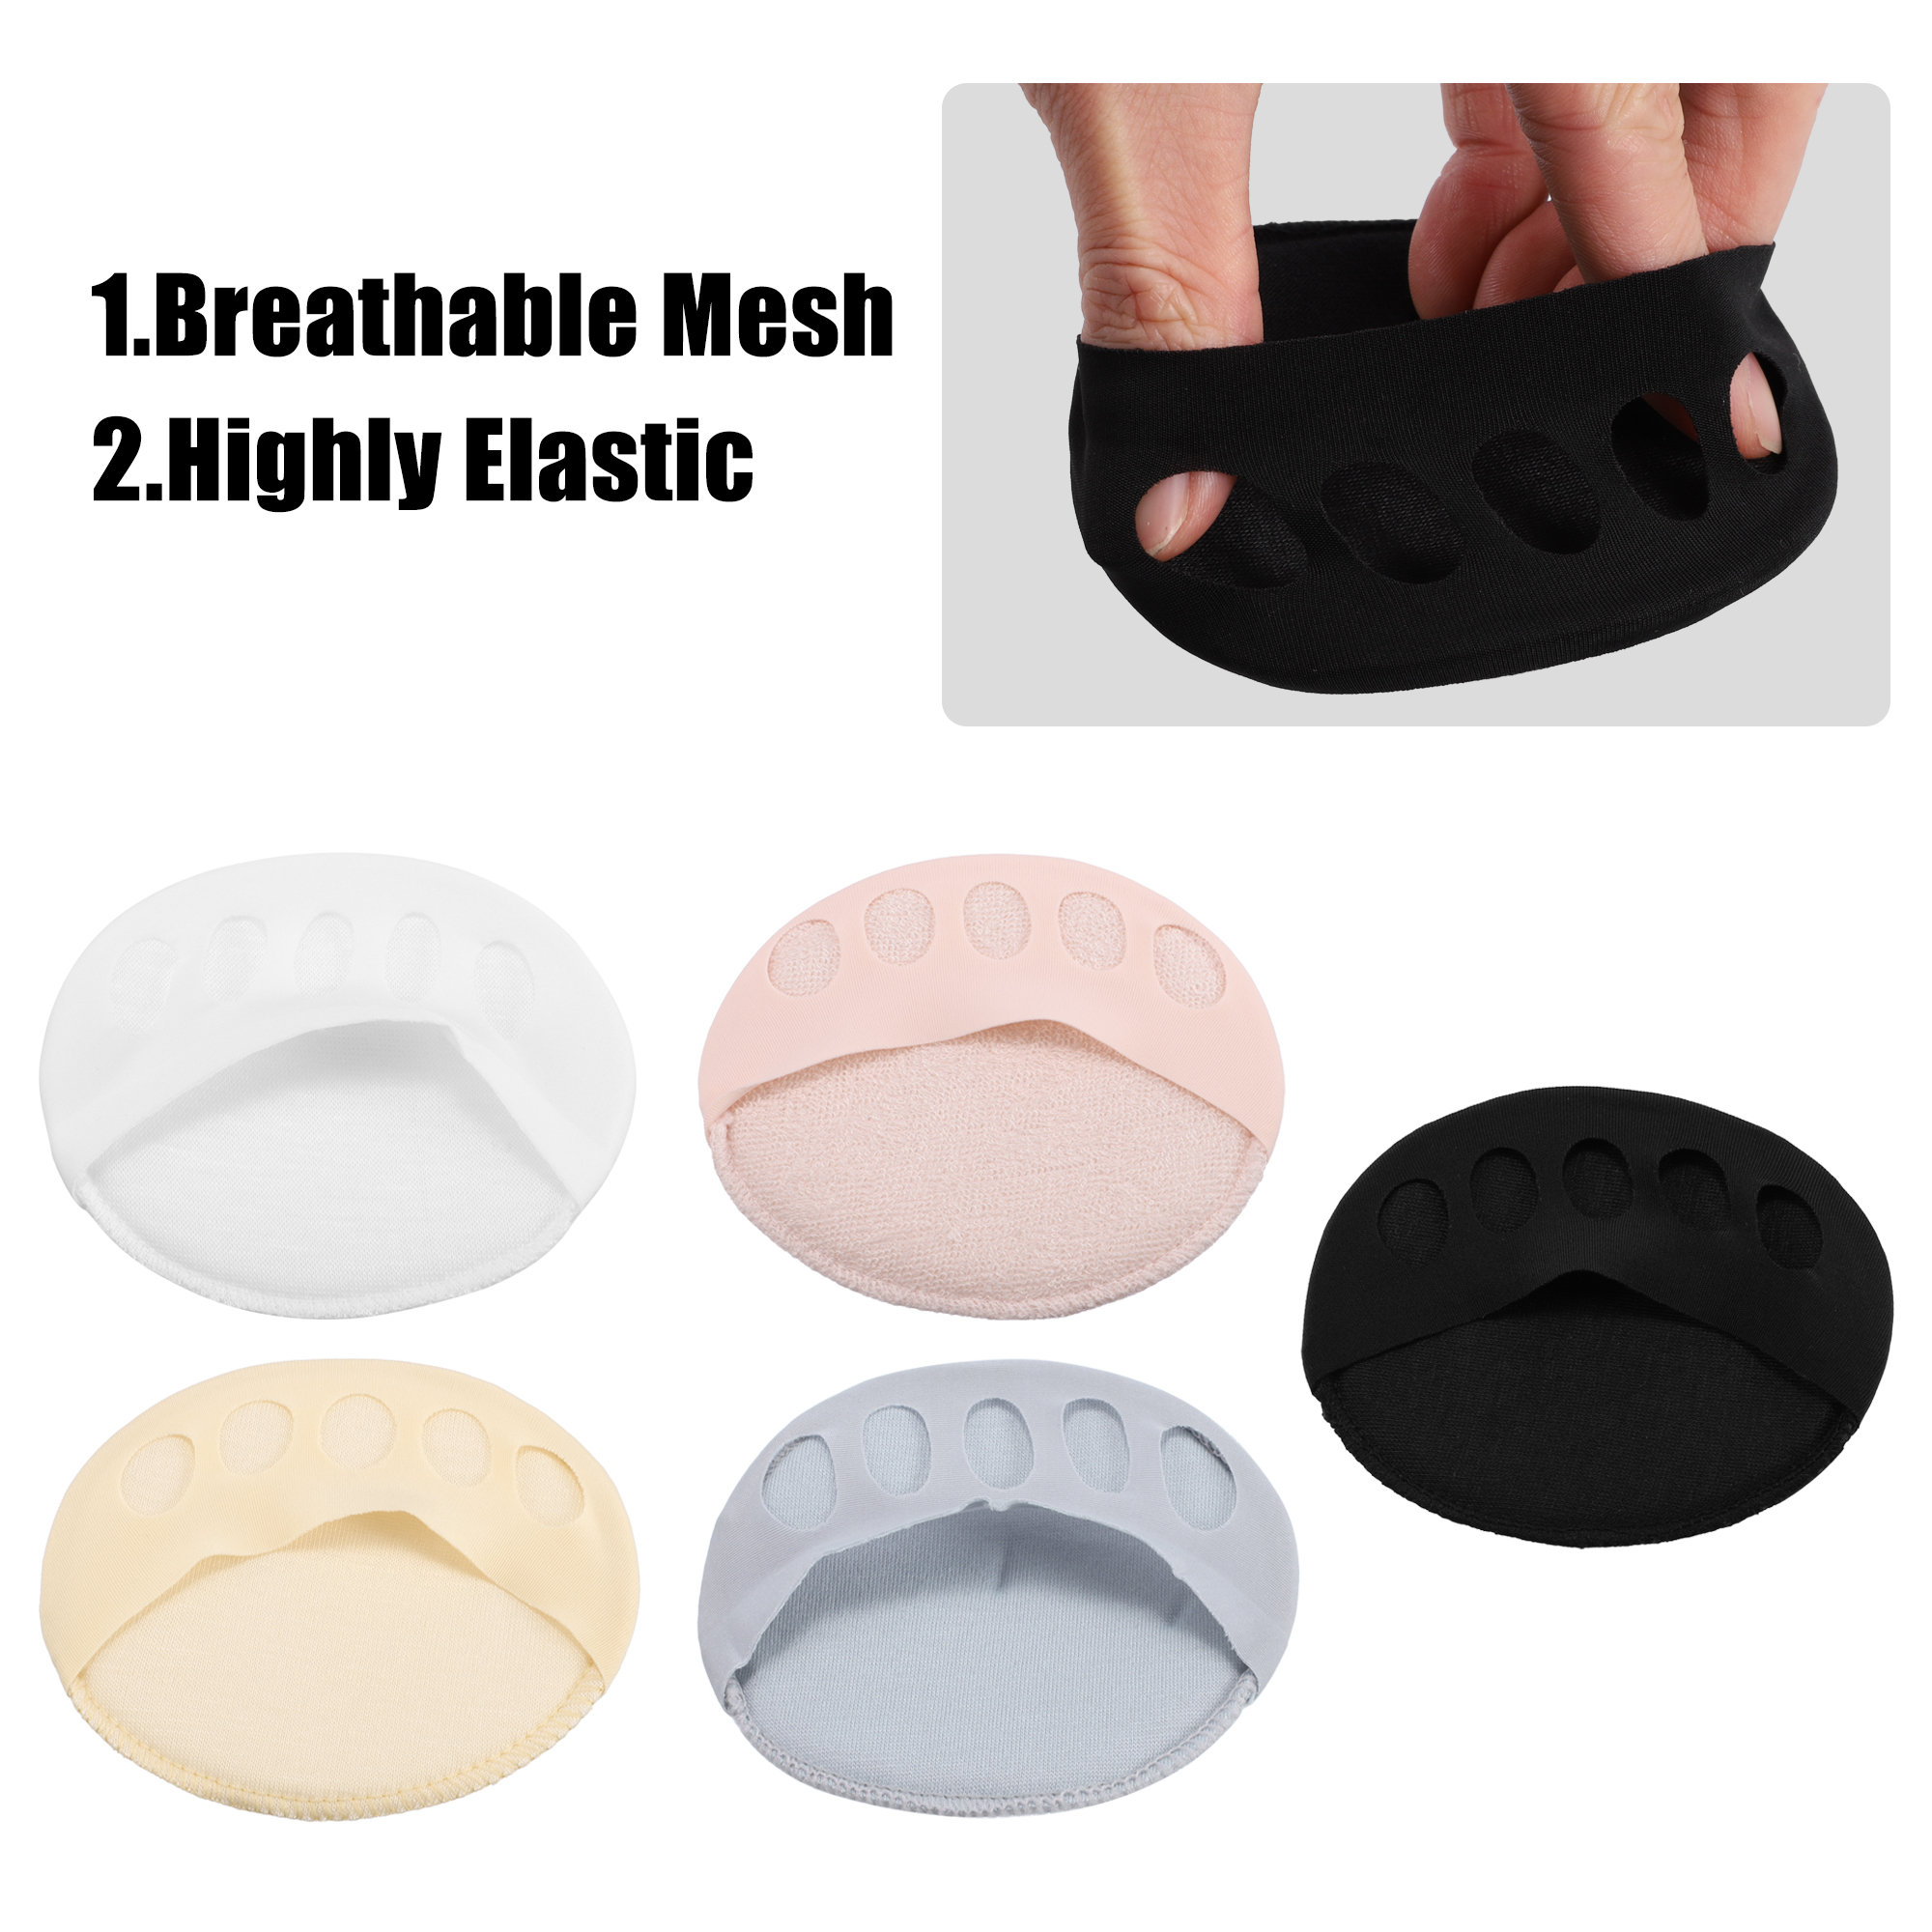 Unique Bargains 5 Pairs Forefoot Pads Five Toes Forefoot Pads Black White Pink Gray Beige